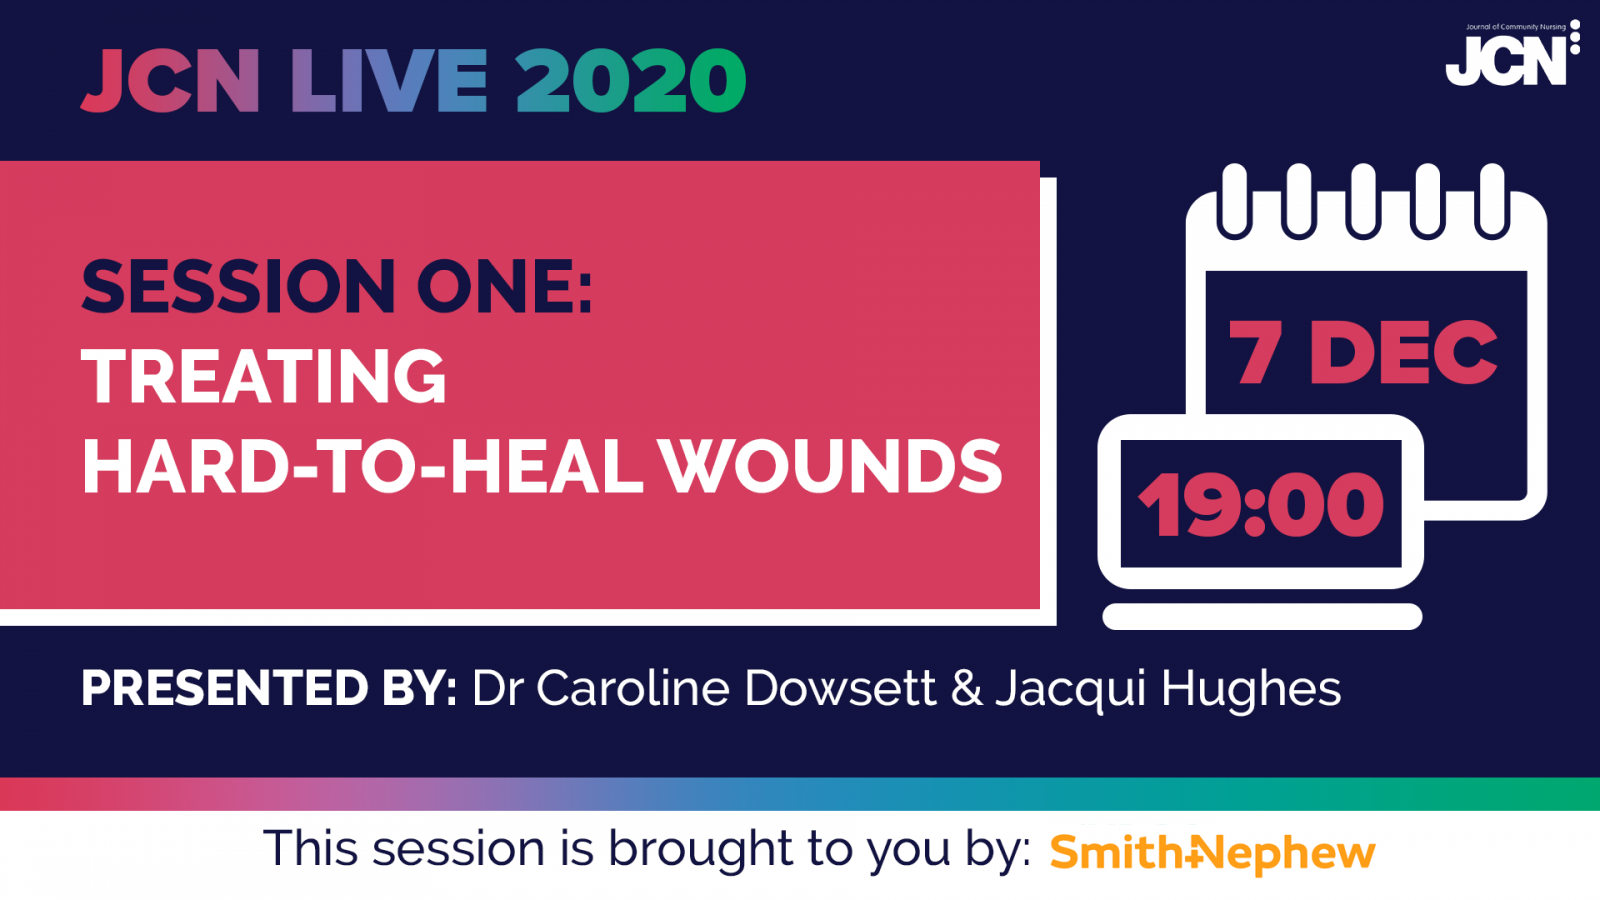 JCN LIVE 2020 - TREATING HARD-TO-HEAL WOUNDS